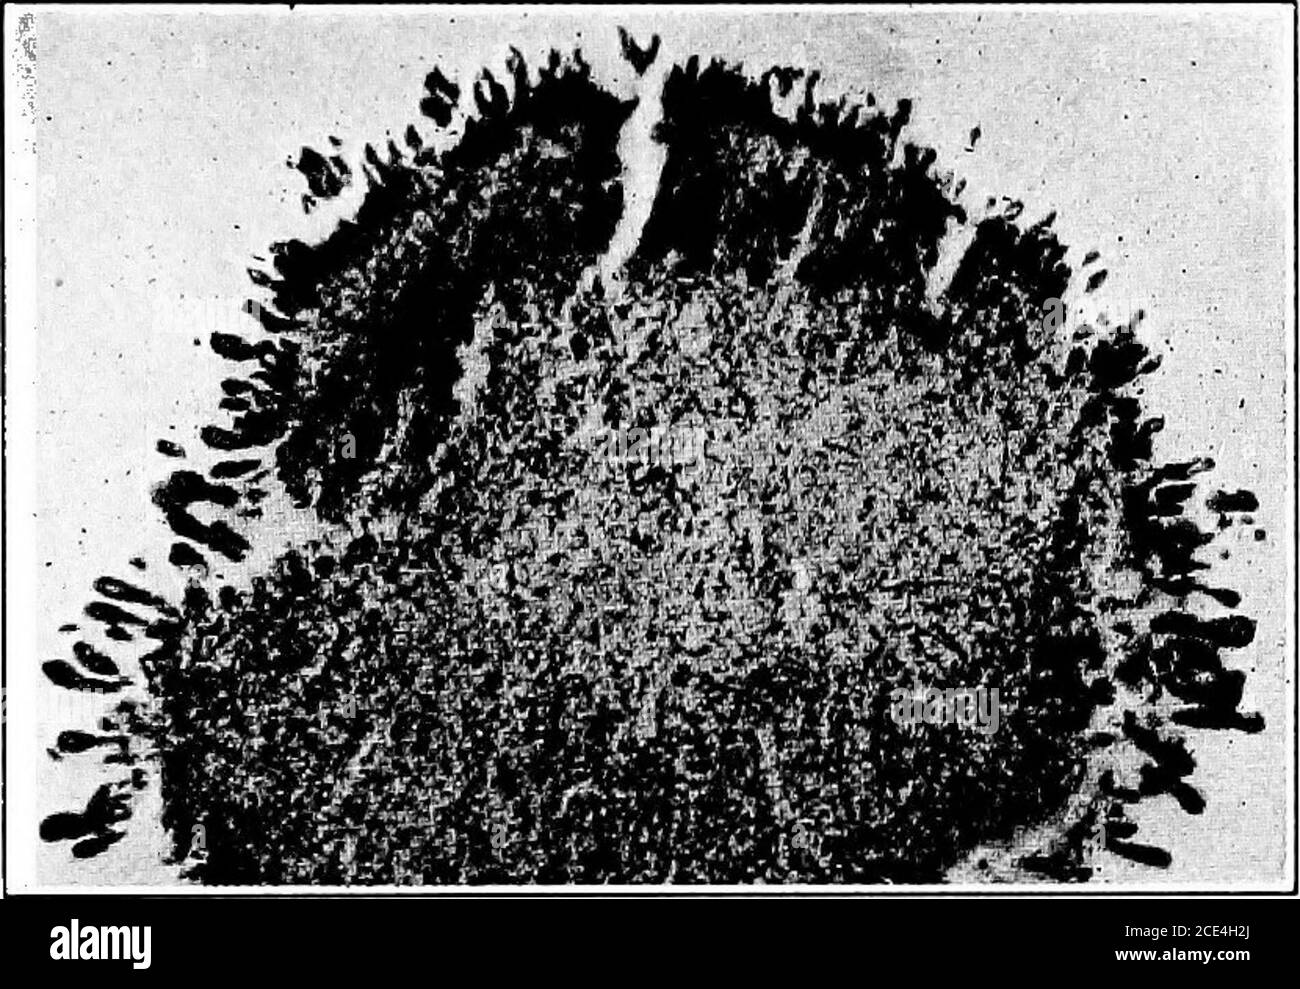 . Pathogenic microörganisms; a practical manual for students, physicians, and health officers . ors showed in all cases but one the presence oftypical actinomyces colonies, in most cases with typical clubs. The The ACTINOMYCES 469 general histological appearance of the tumors was like that of actino-mycotic tissue. Wolf in a later paper reports that an animal inoculated in the peri-toneal cavity with a culture of the same organism had lived a yearand a half. At the autopsy several tumors were found in the peritonealcavity, and in the liver a large typical tumor in which were manycolonies whic Stock Photo